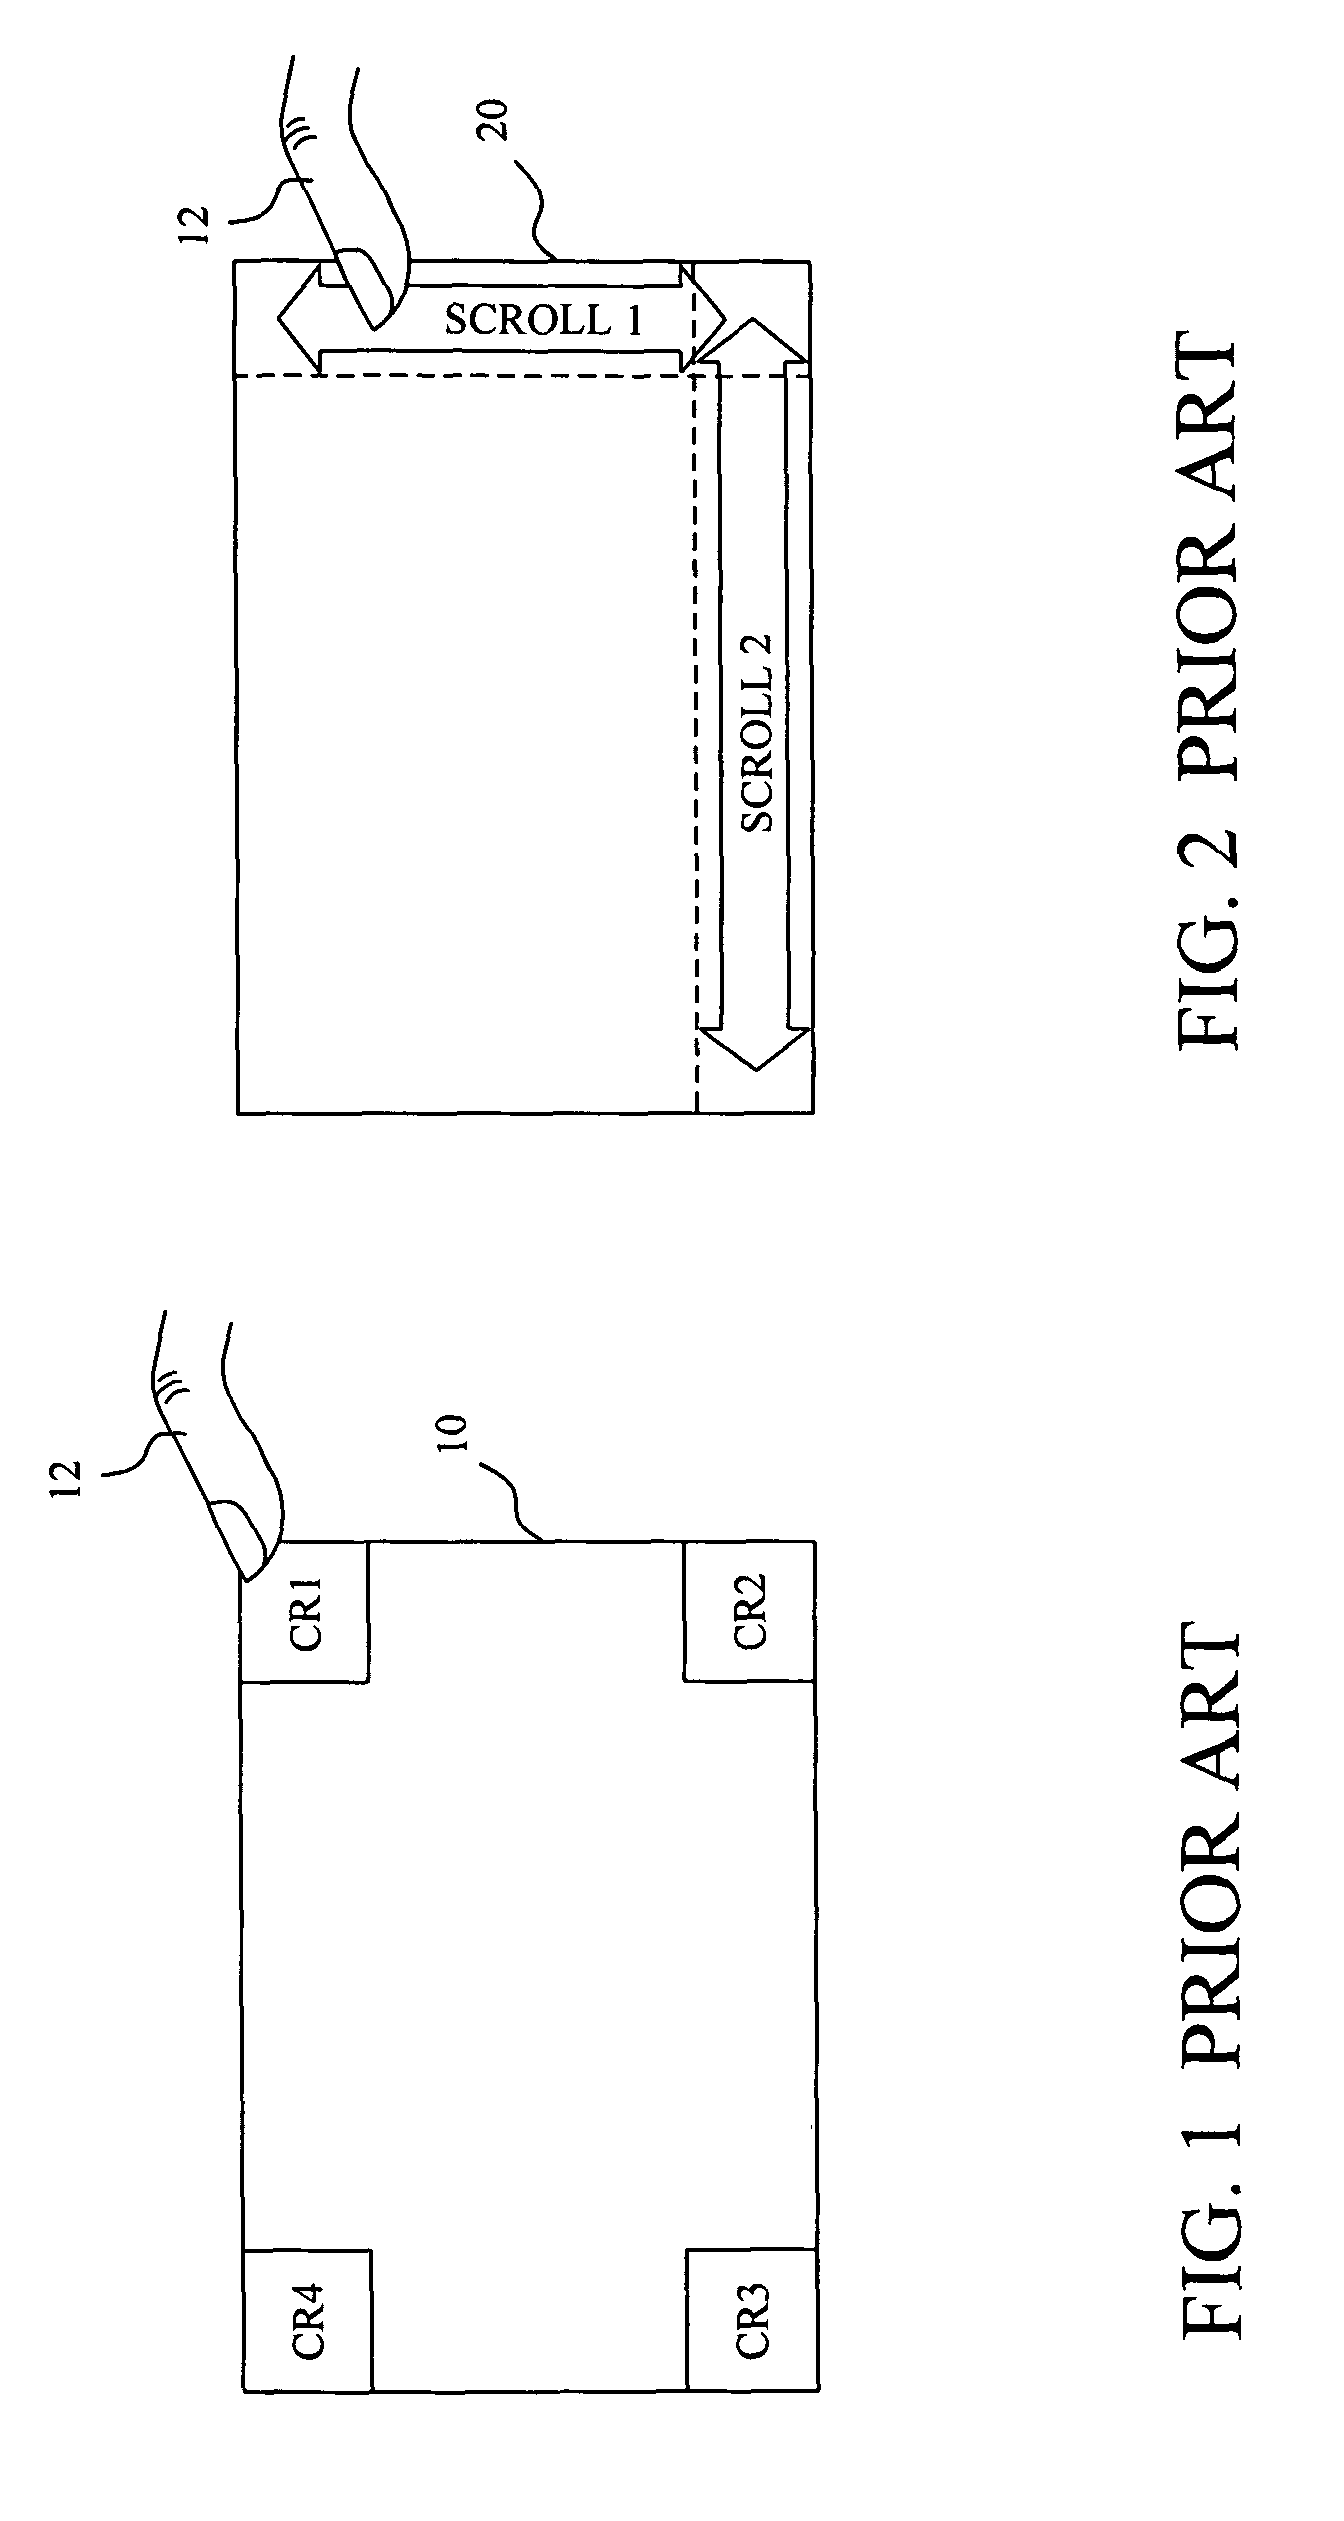 Method for detecting overlapped function area on a touchpad